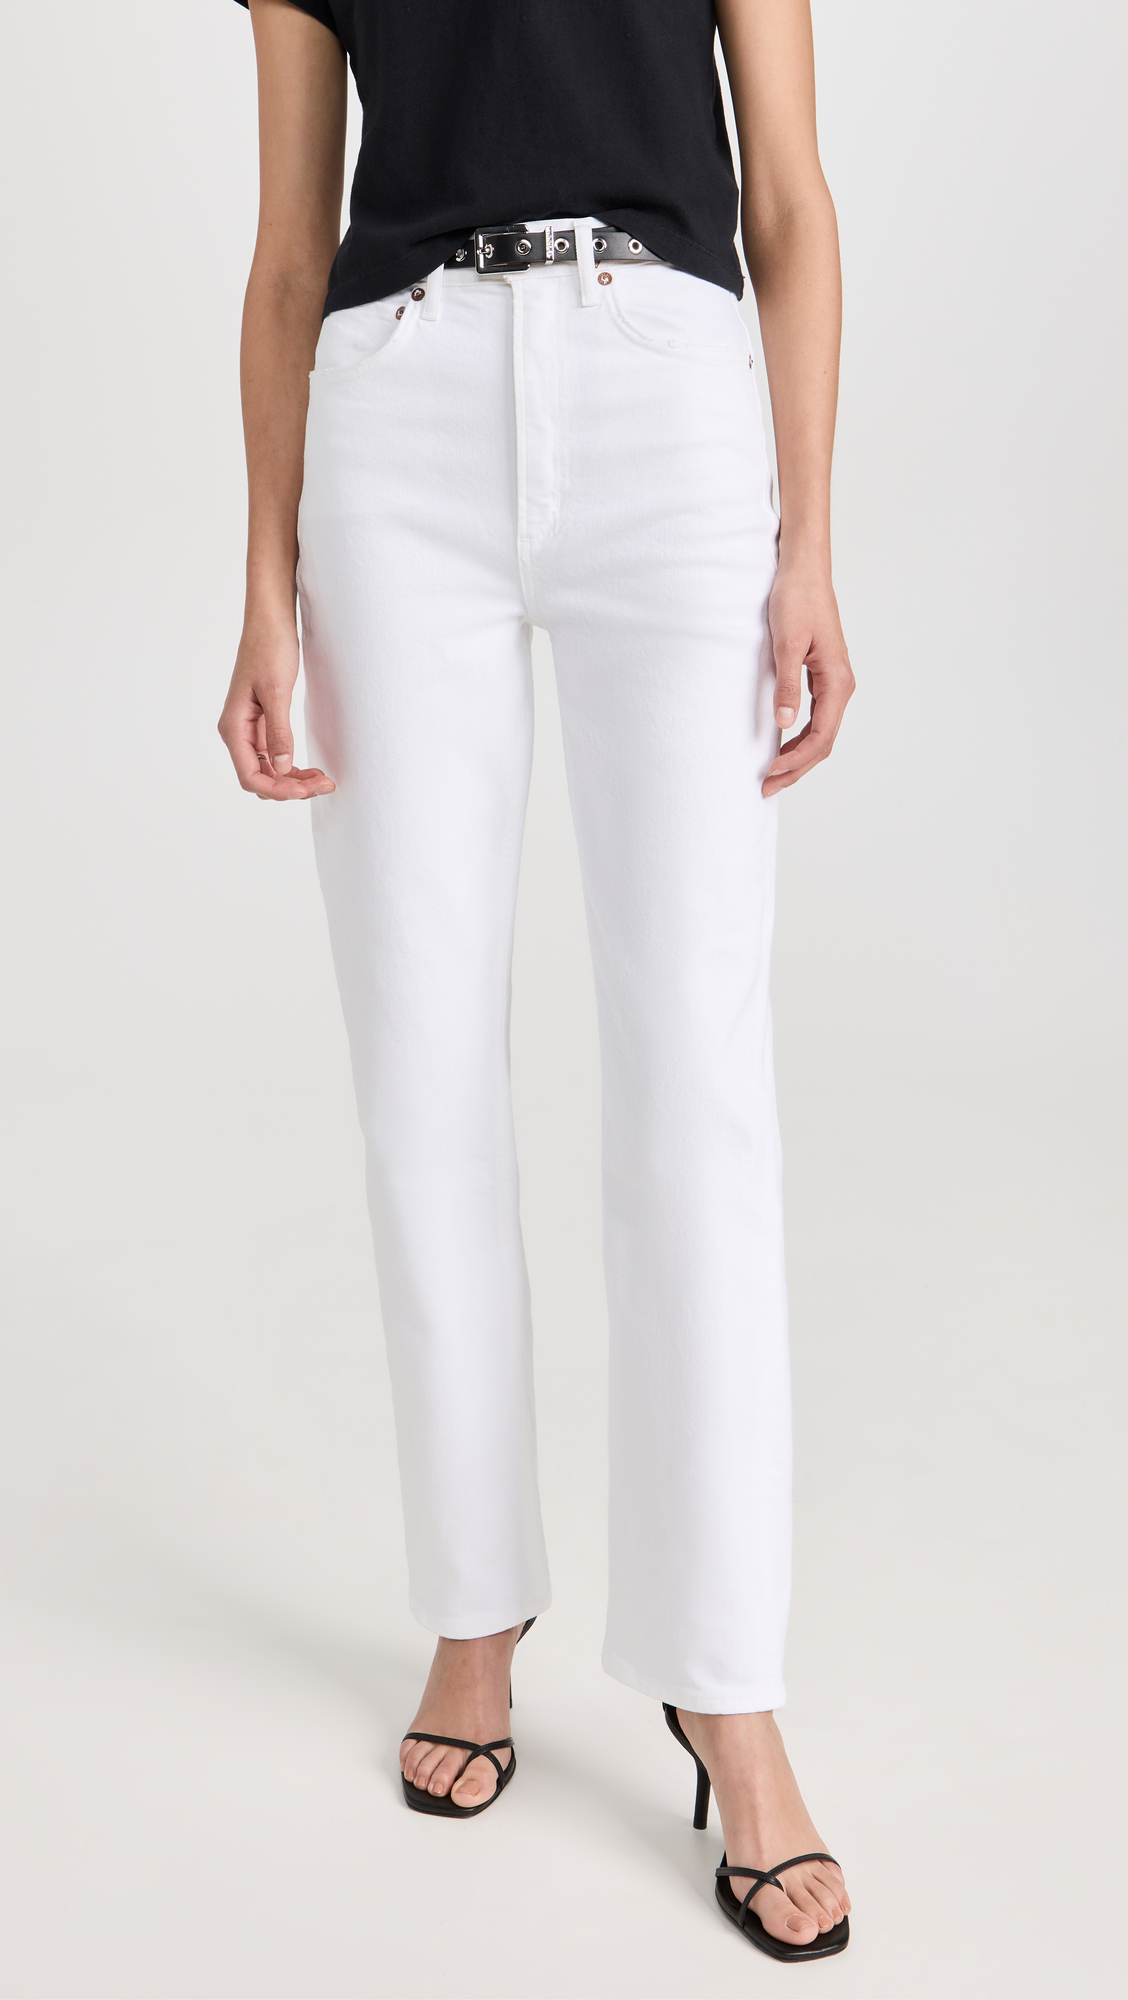 7 All-White Outfits for Women That Are So On-Trend | Who What Wear